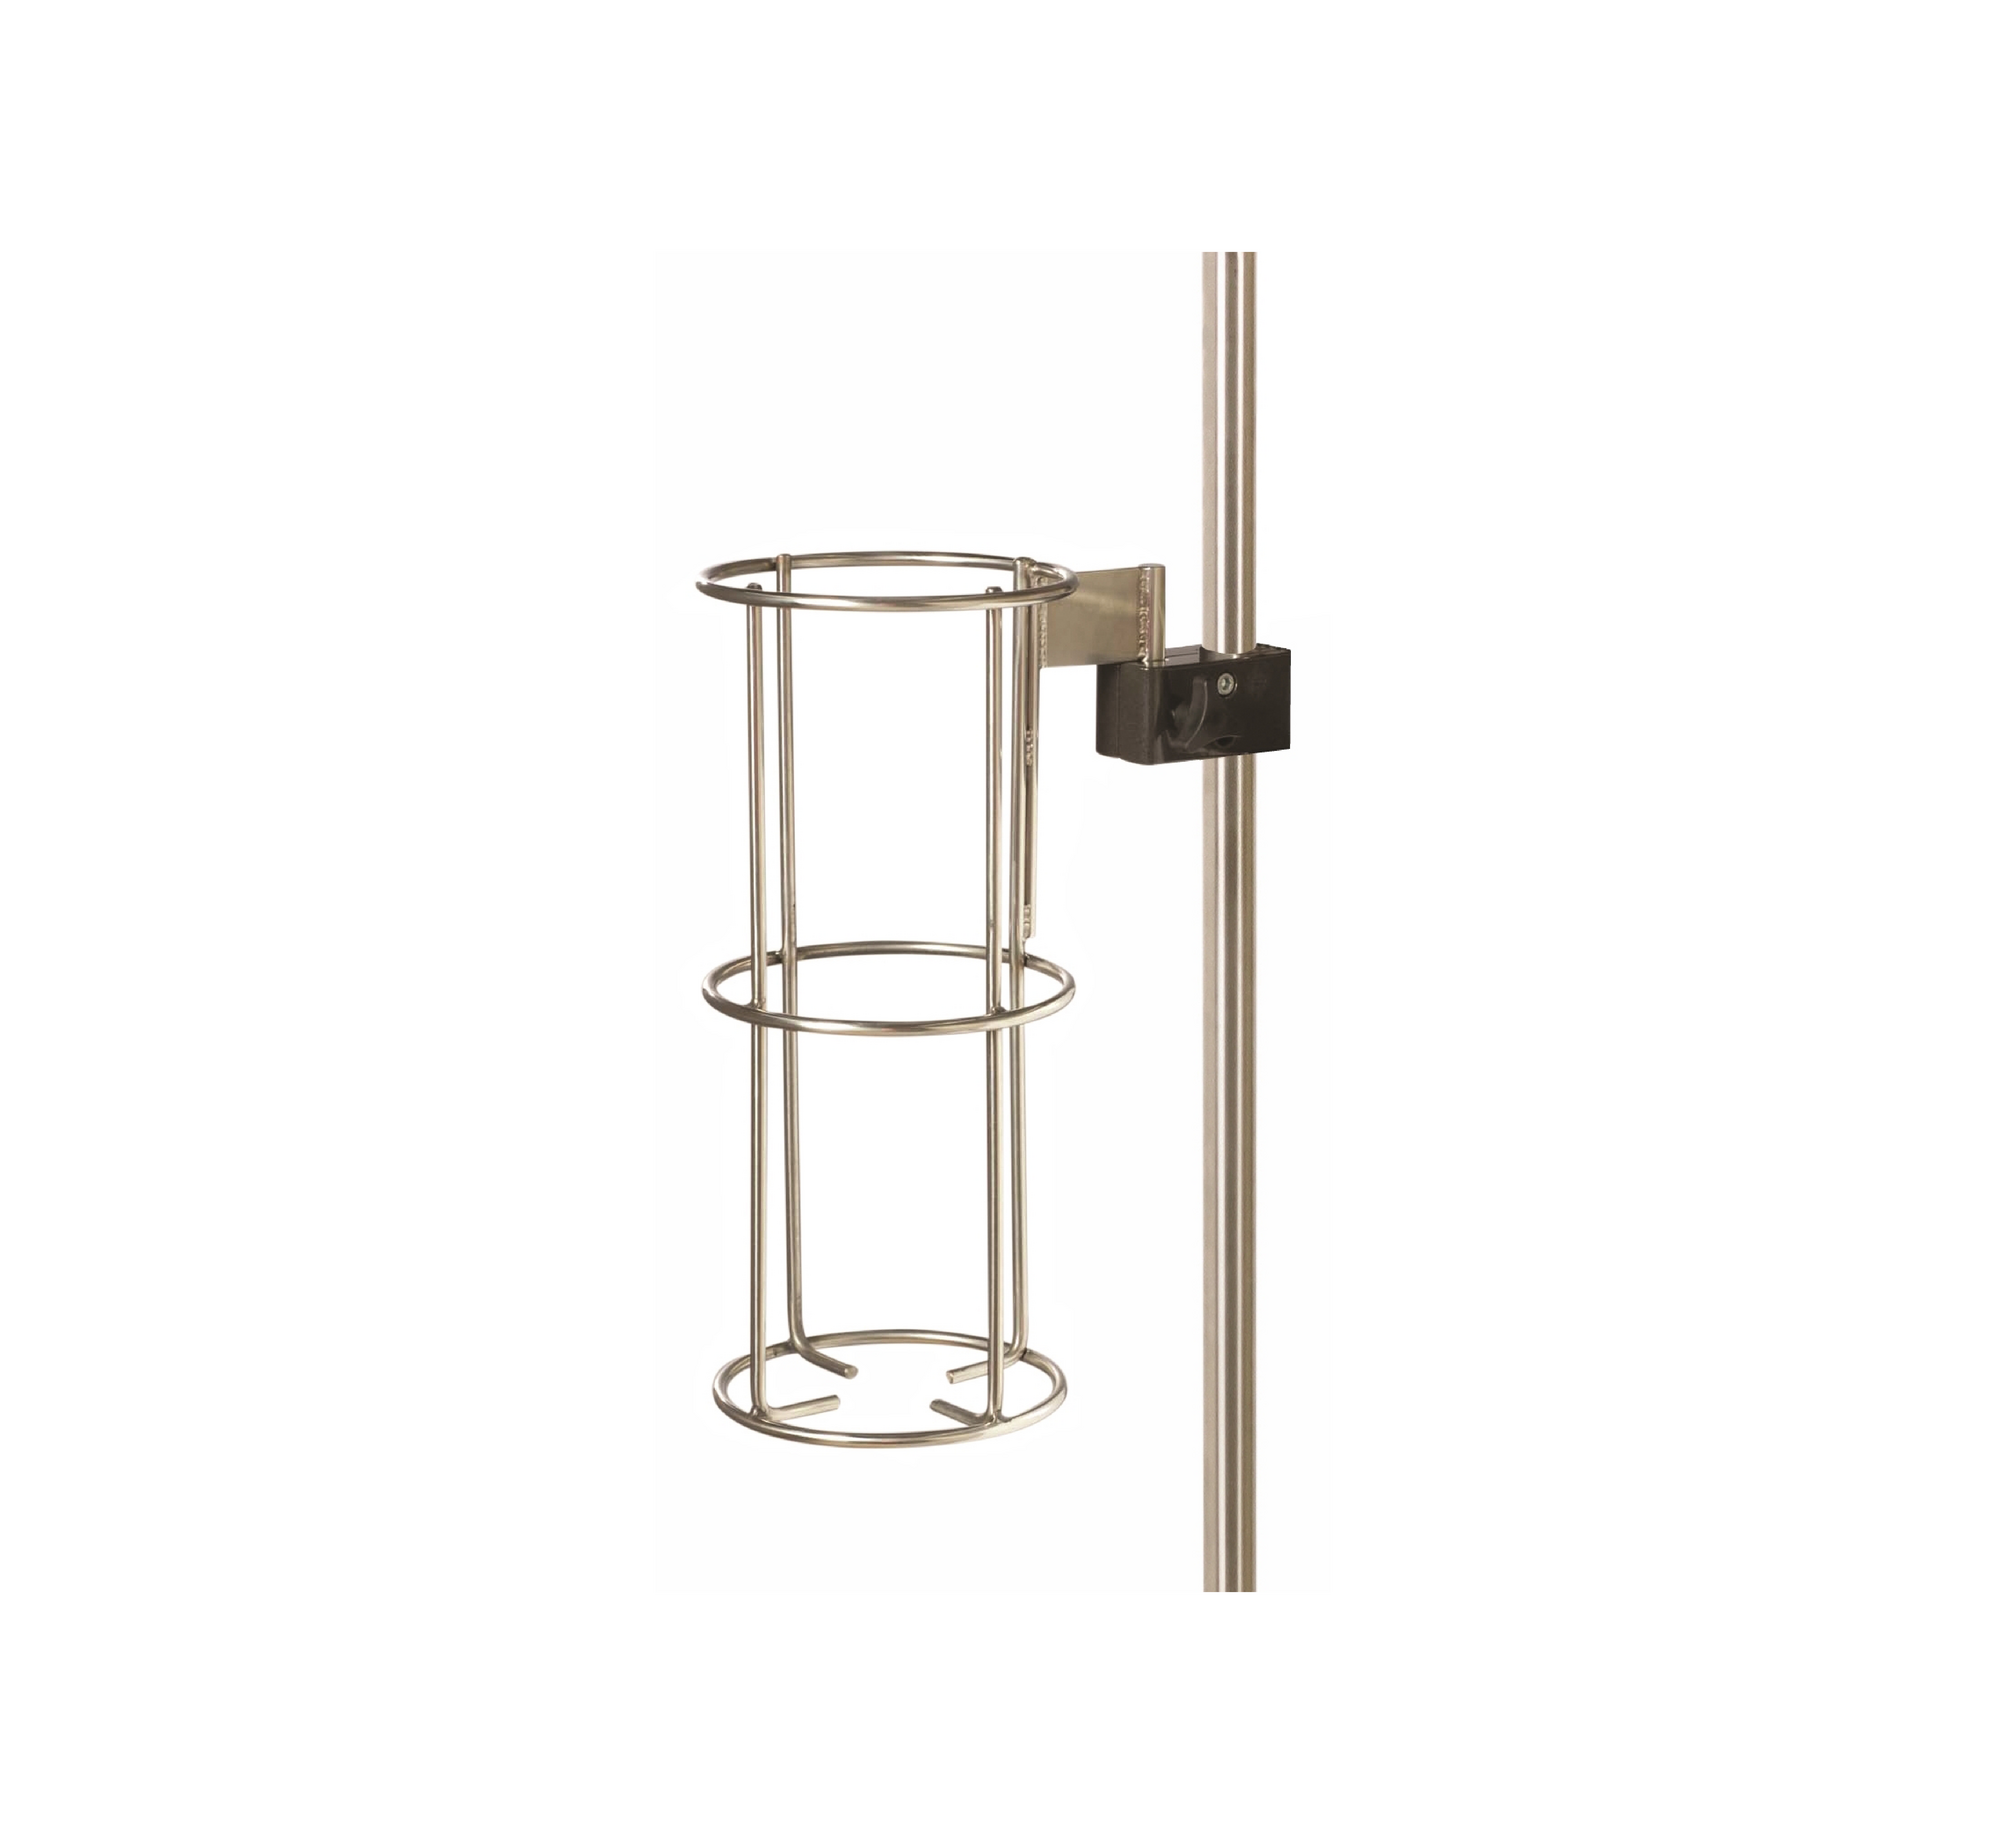 IV Pole Vertical Oxygen Bottle Holder and Clamp | Stainless Steel Furniture